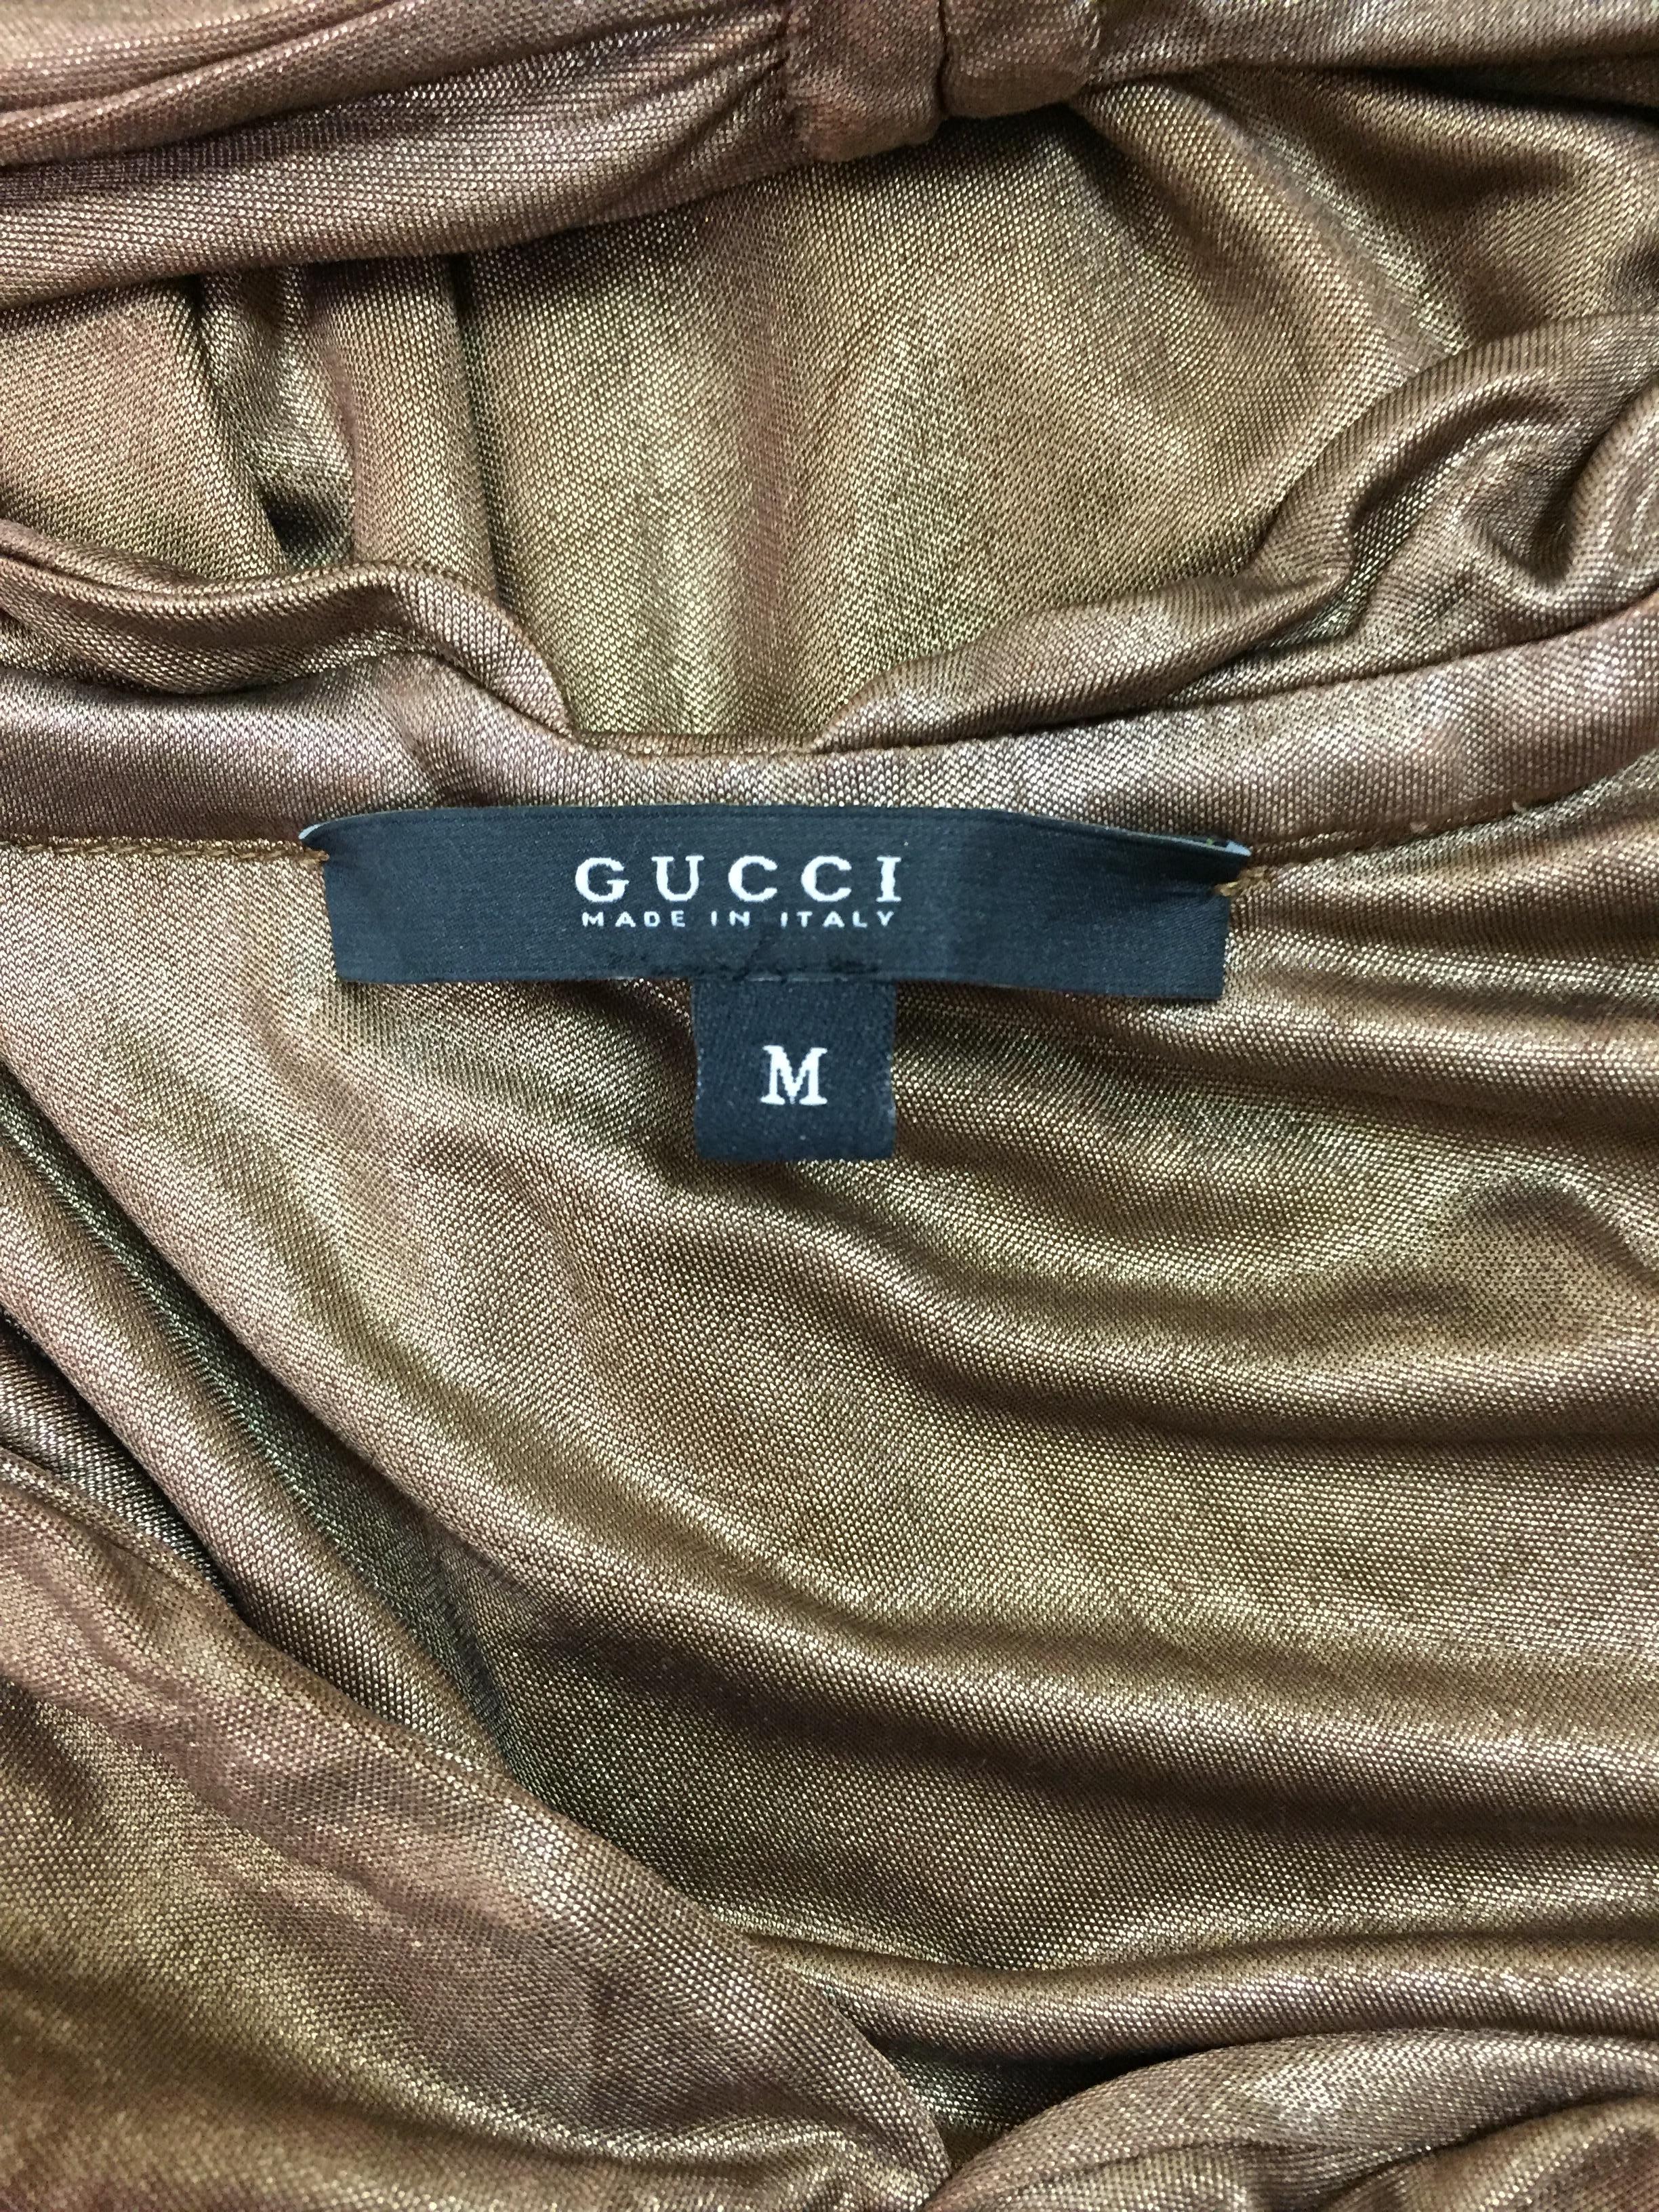 F/W 2006 Gucci Runway Gold Plunging Gown Dress Wide Mirror Corset Belt In Good Condition In Yukon, OK